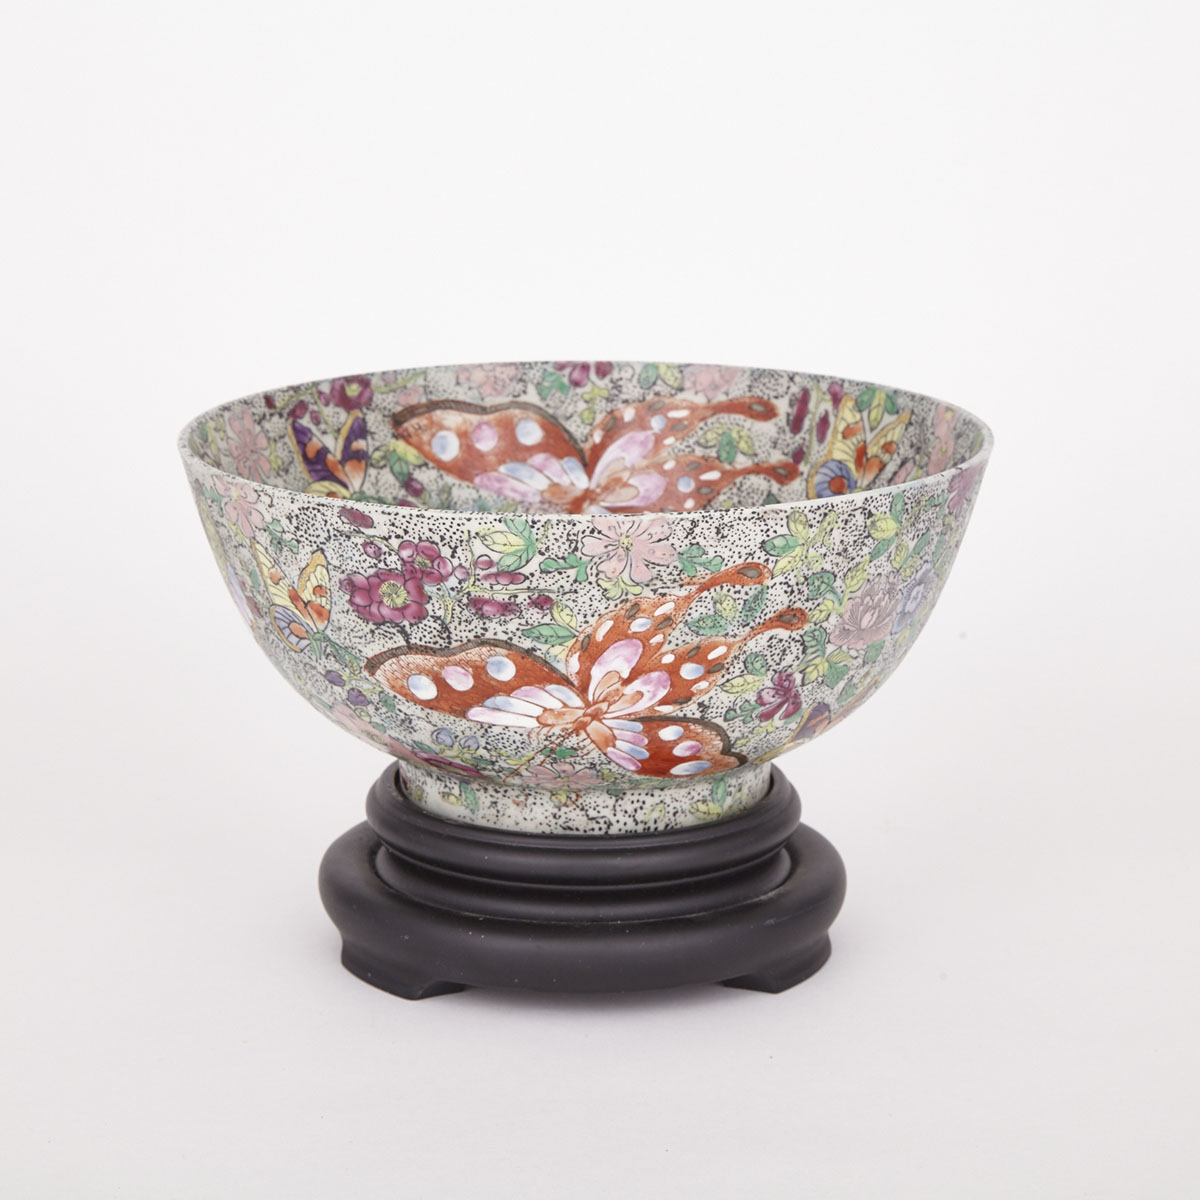 Butterfly Bowl, Republic Period